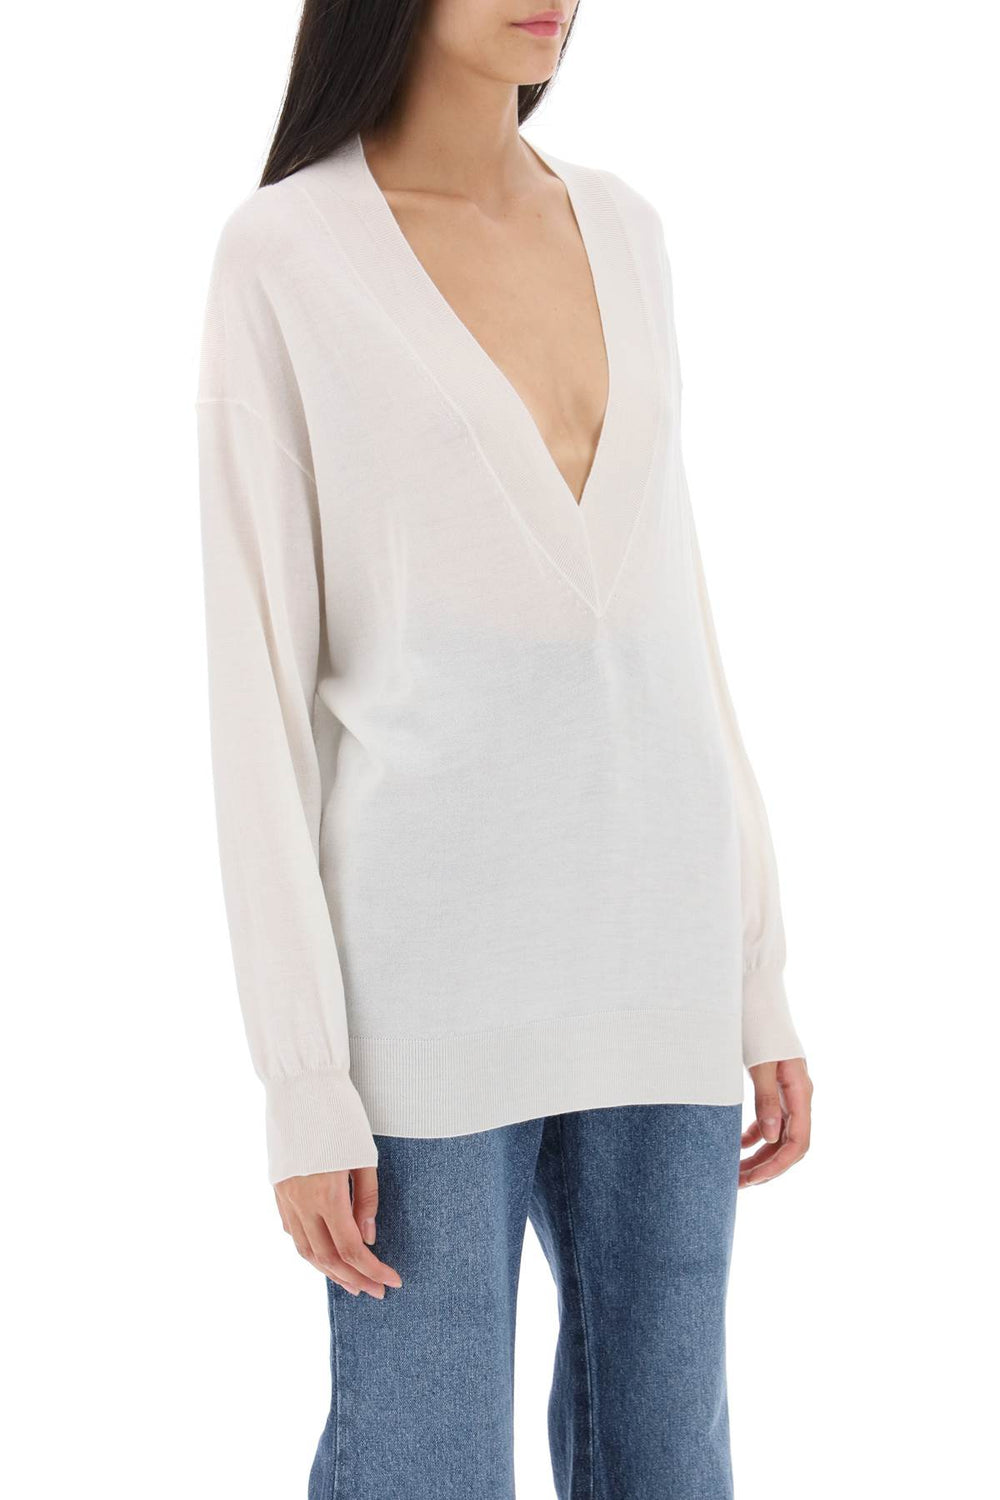 Tom ford sweater in cashmere and silk-1